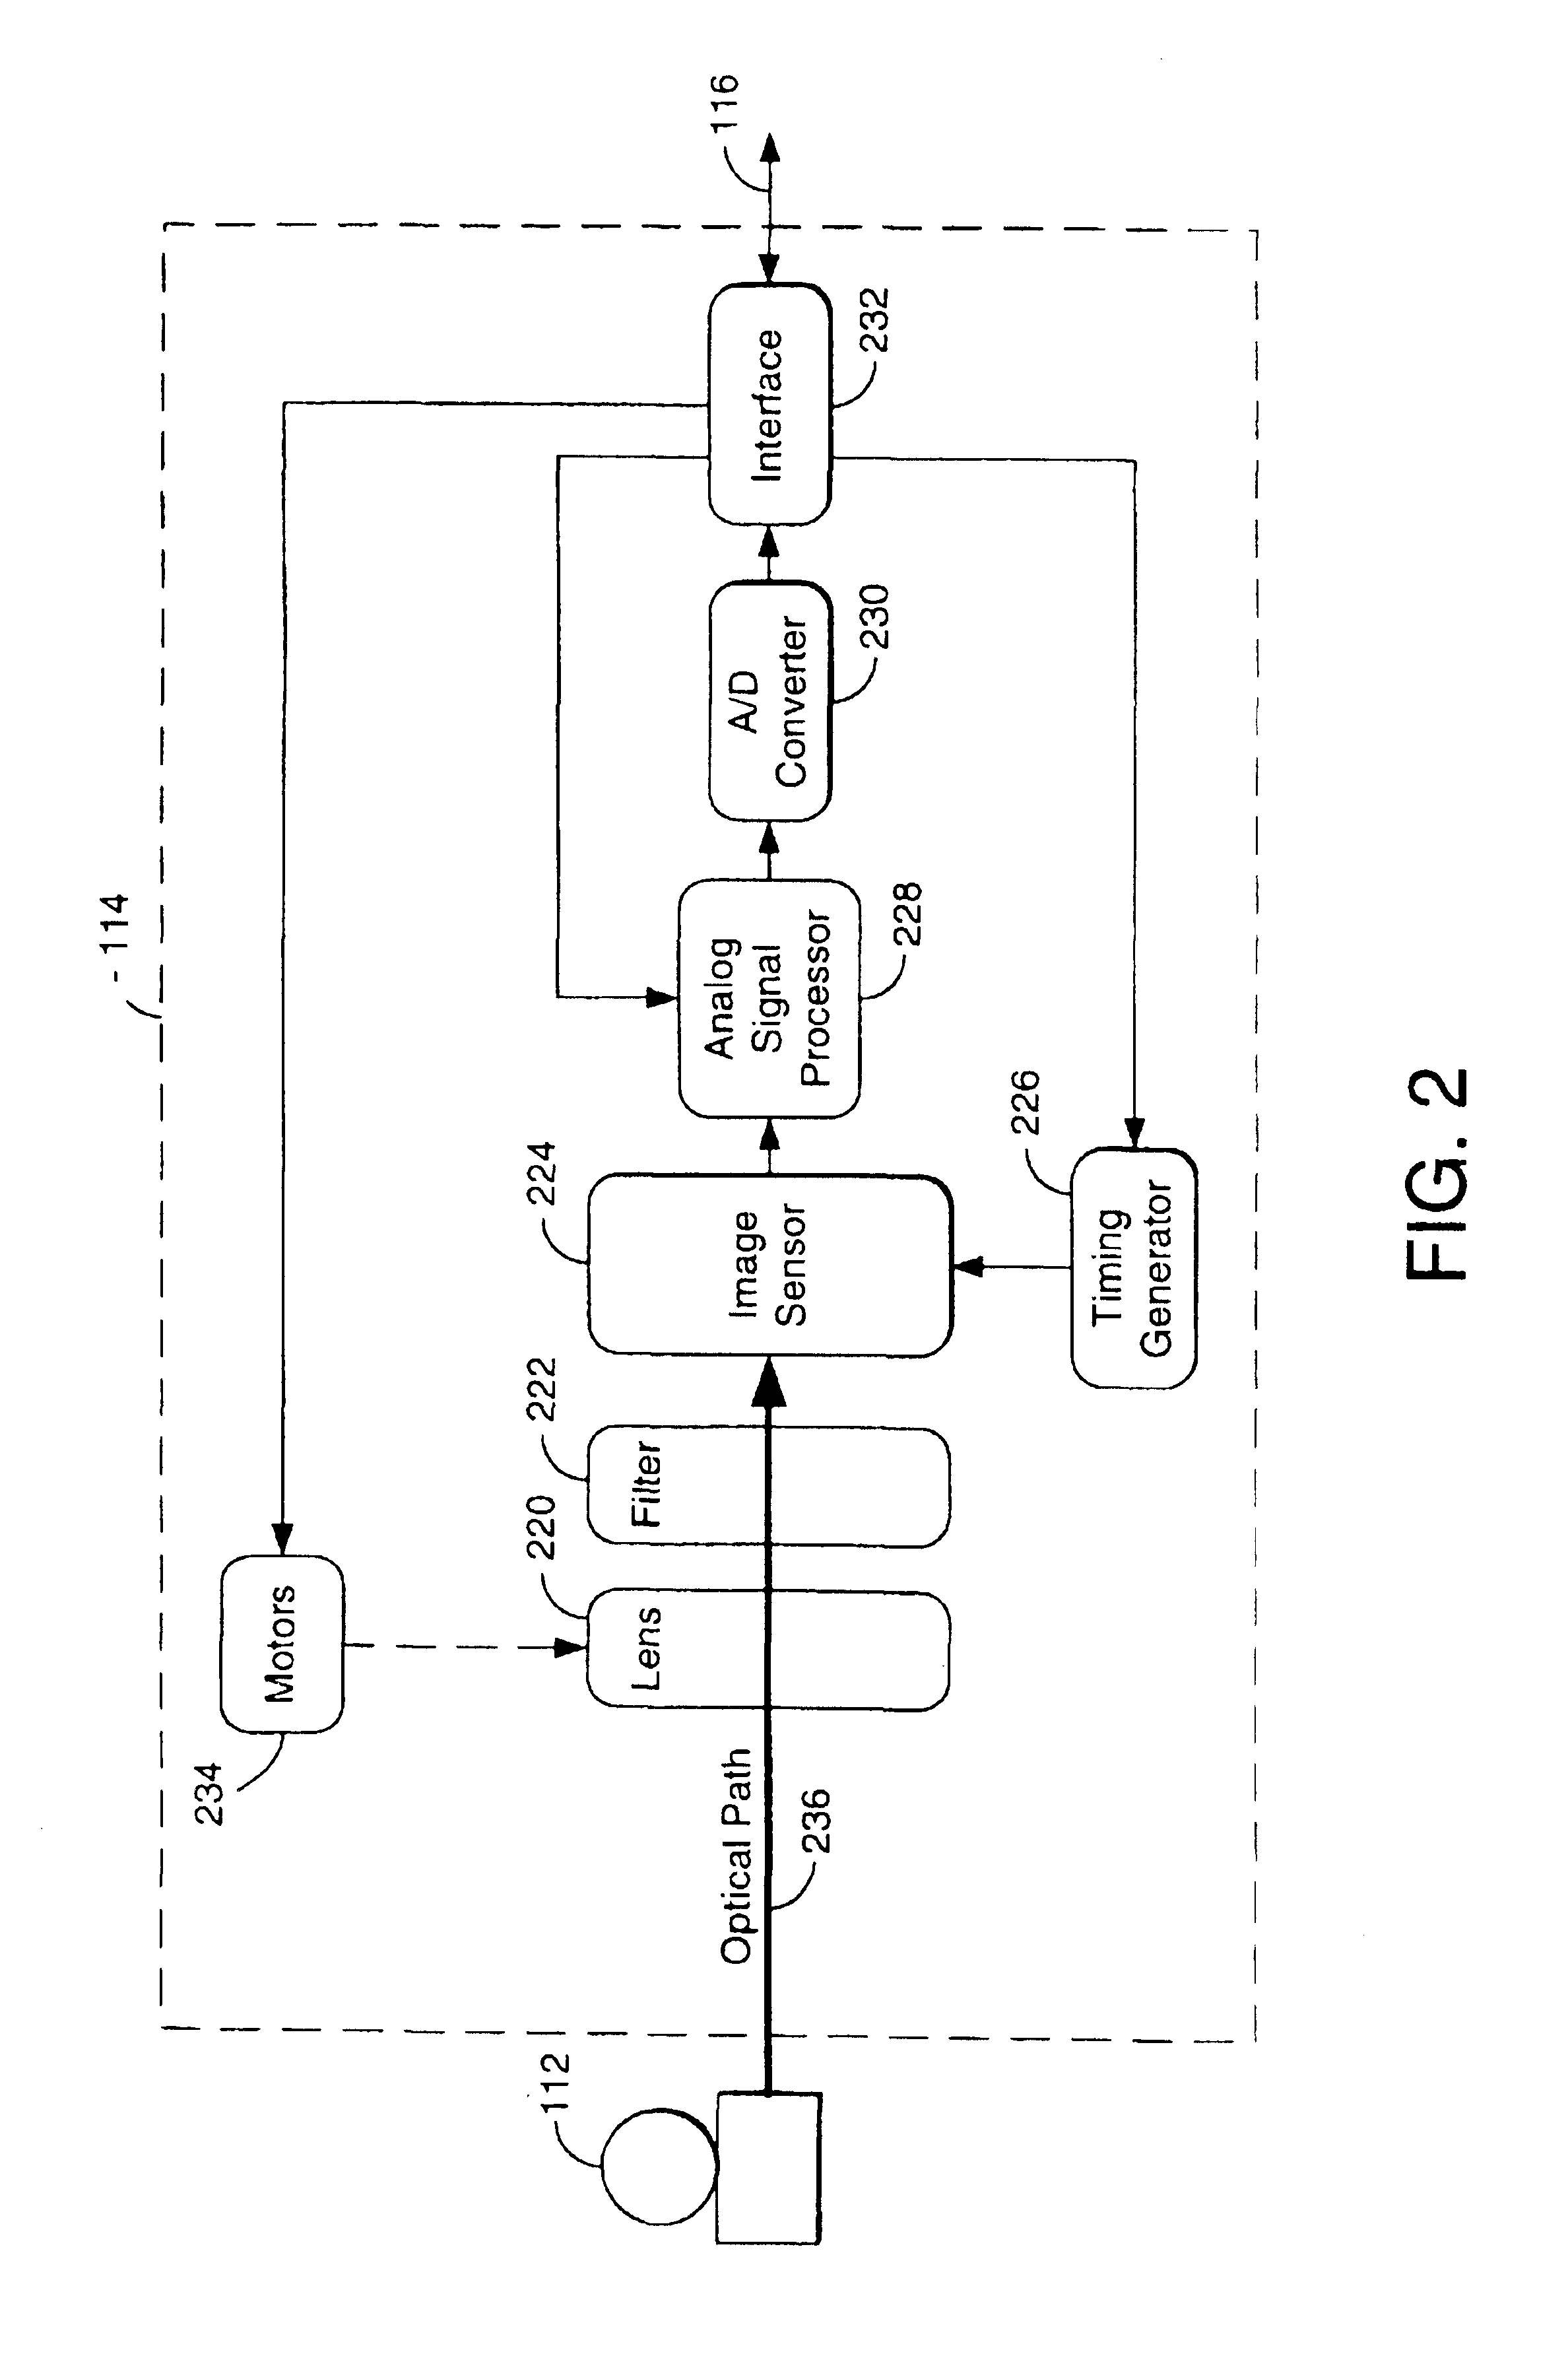 System and method for preventing damage to media files within a digital camera device